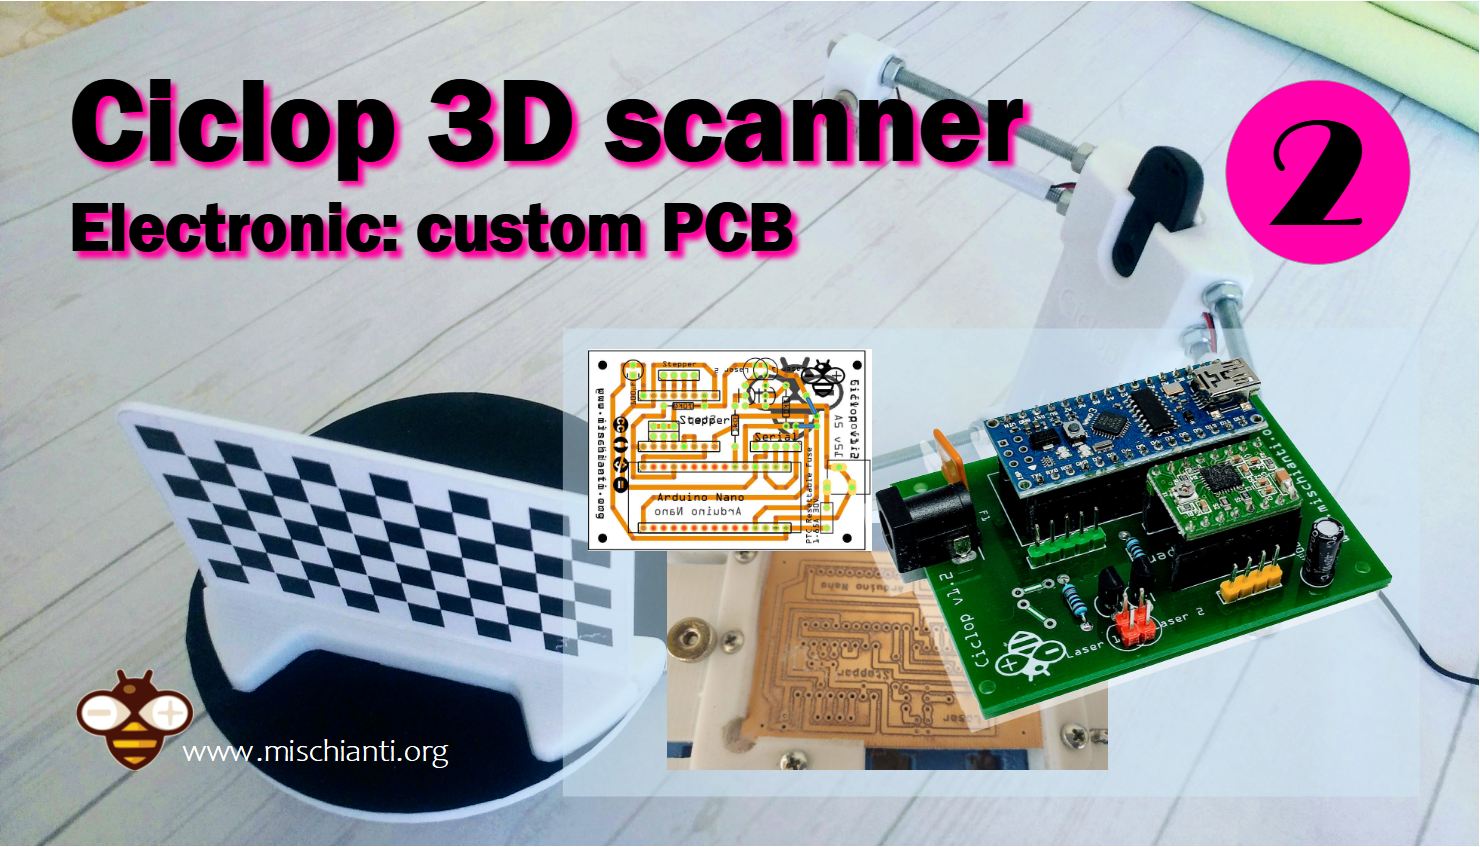 Semoic Open Source Zum Scan Expansion Controller Board with a4988 Stepper Motor Diver for Ciclop 3D Scanner